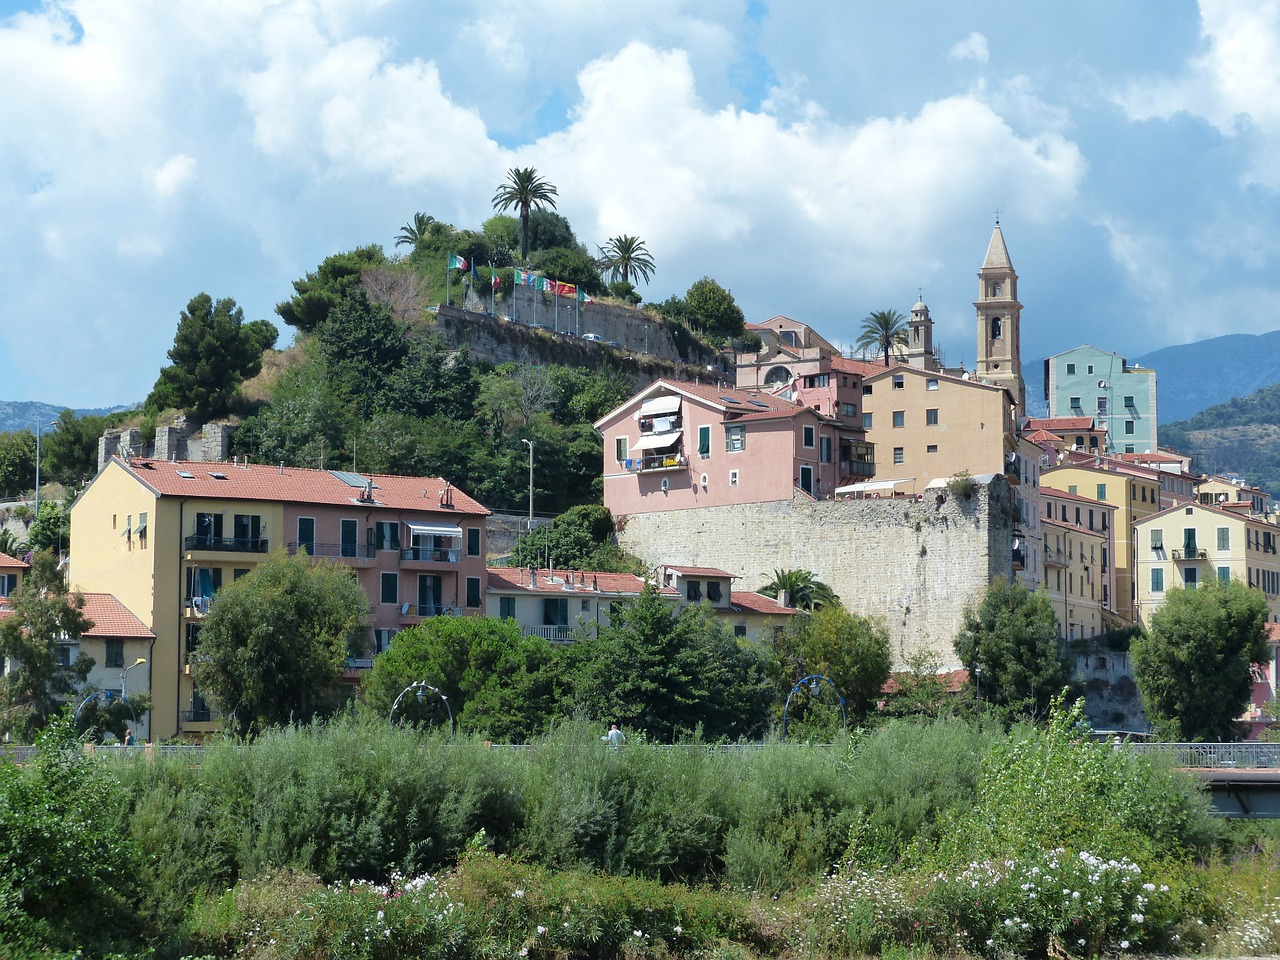 ventimiglia old town roofs free photo